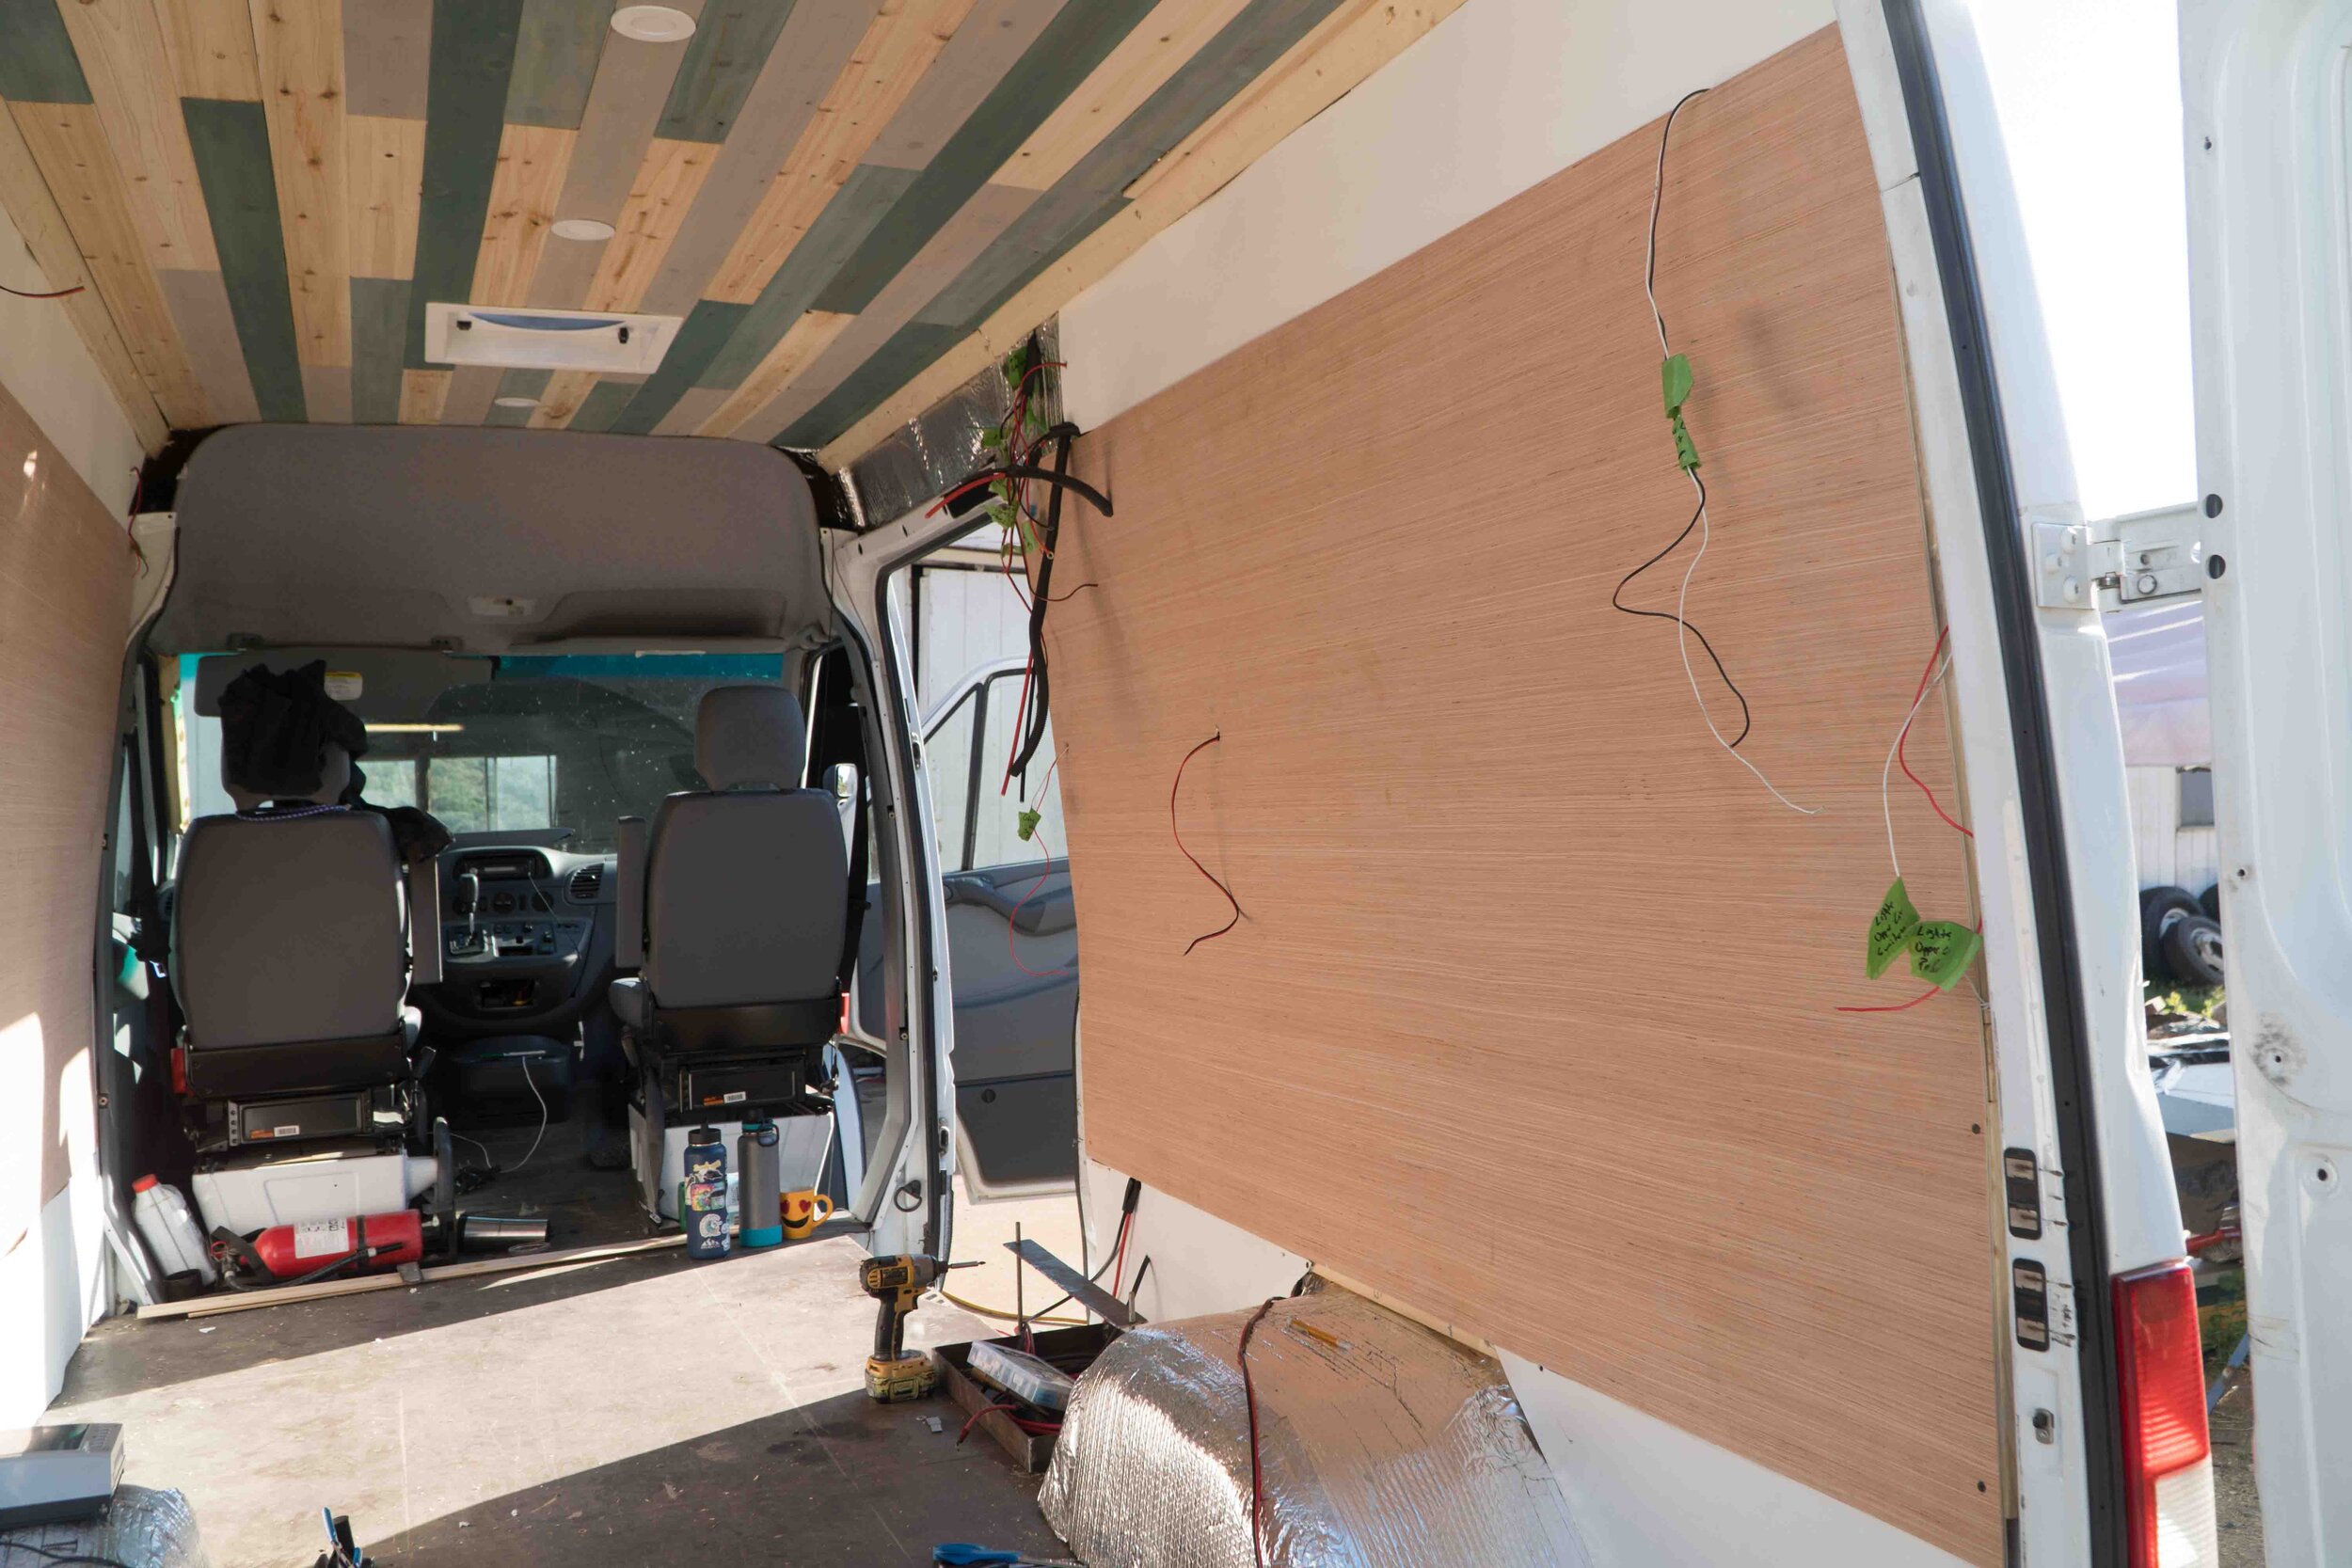 How to put walls on a van